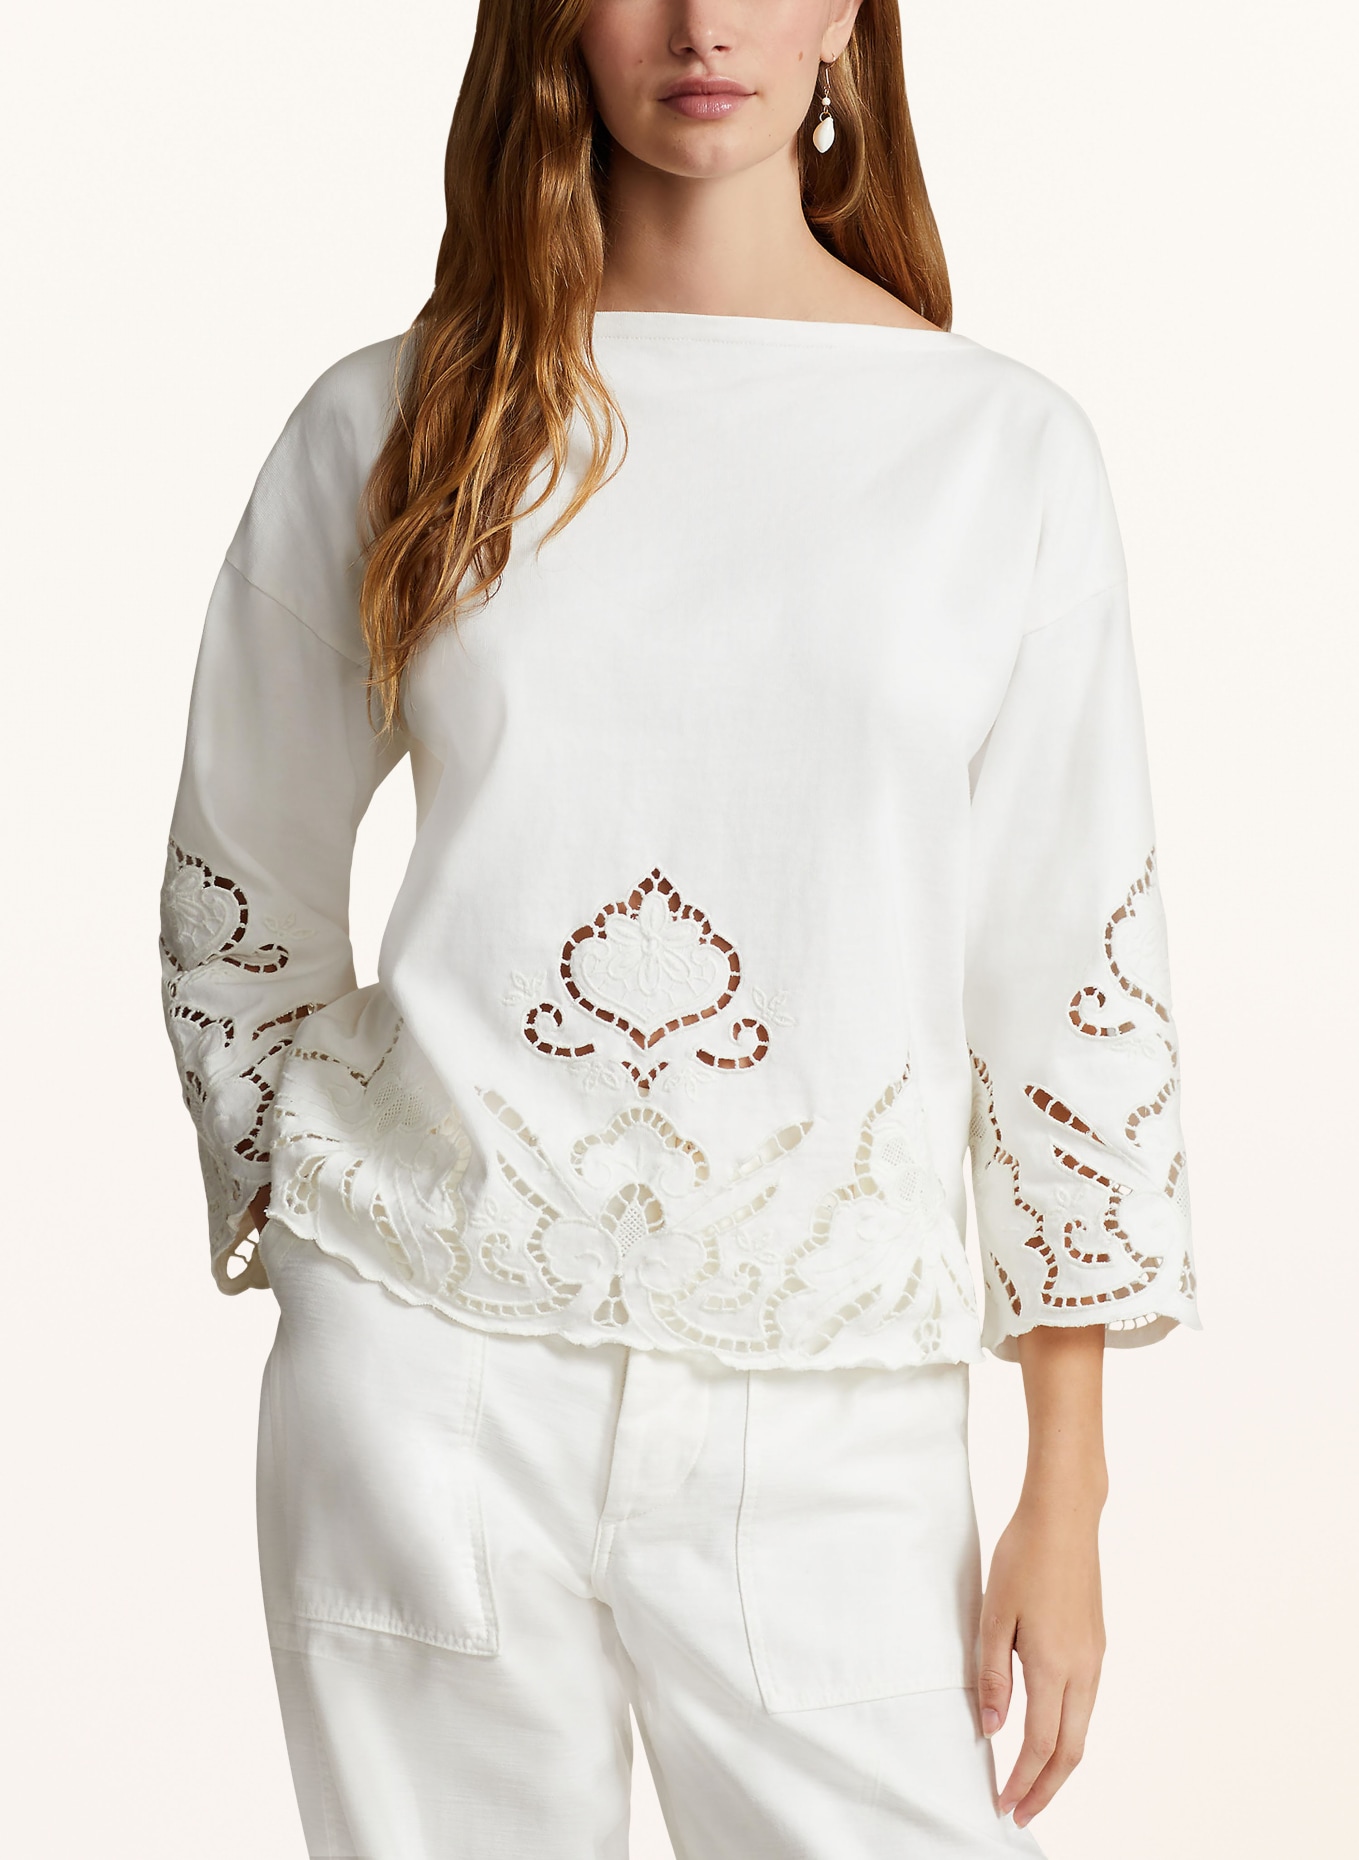 POLO RALPH LAUREN Shirt blouse with broderie anglaise and 3/4 sleeves, Color: WHITE (Image 4)